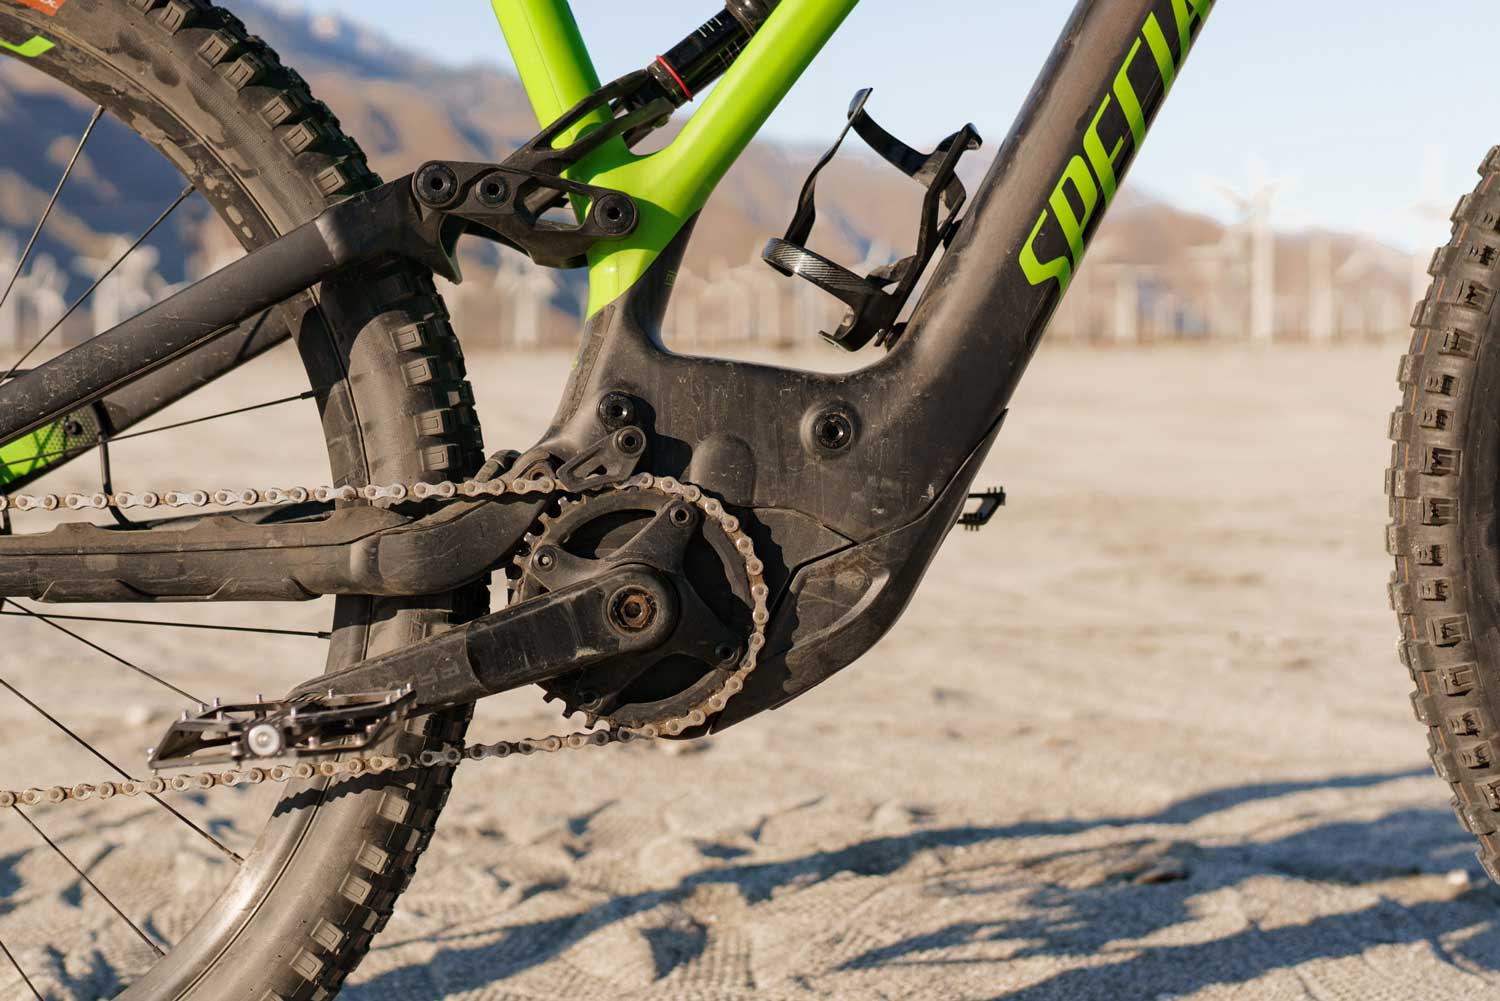 Specialized Turbo Levo Expert eMTB frame and close-up